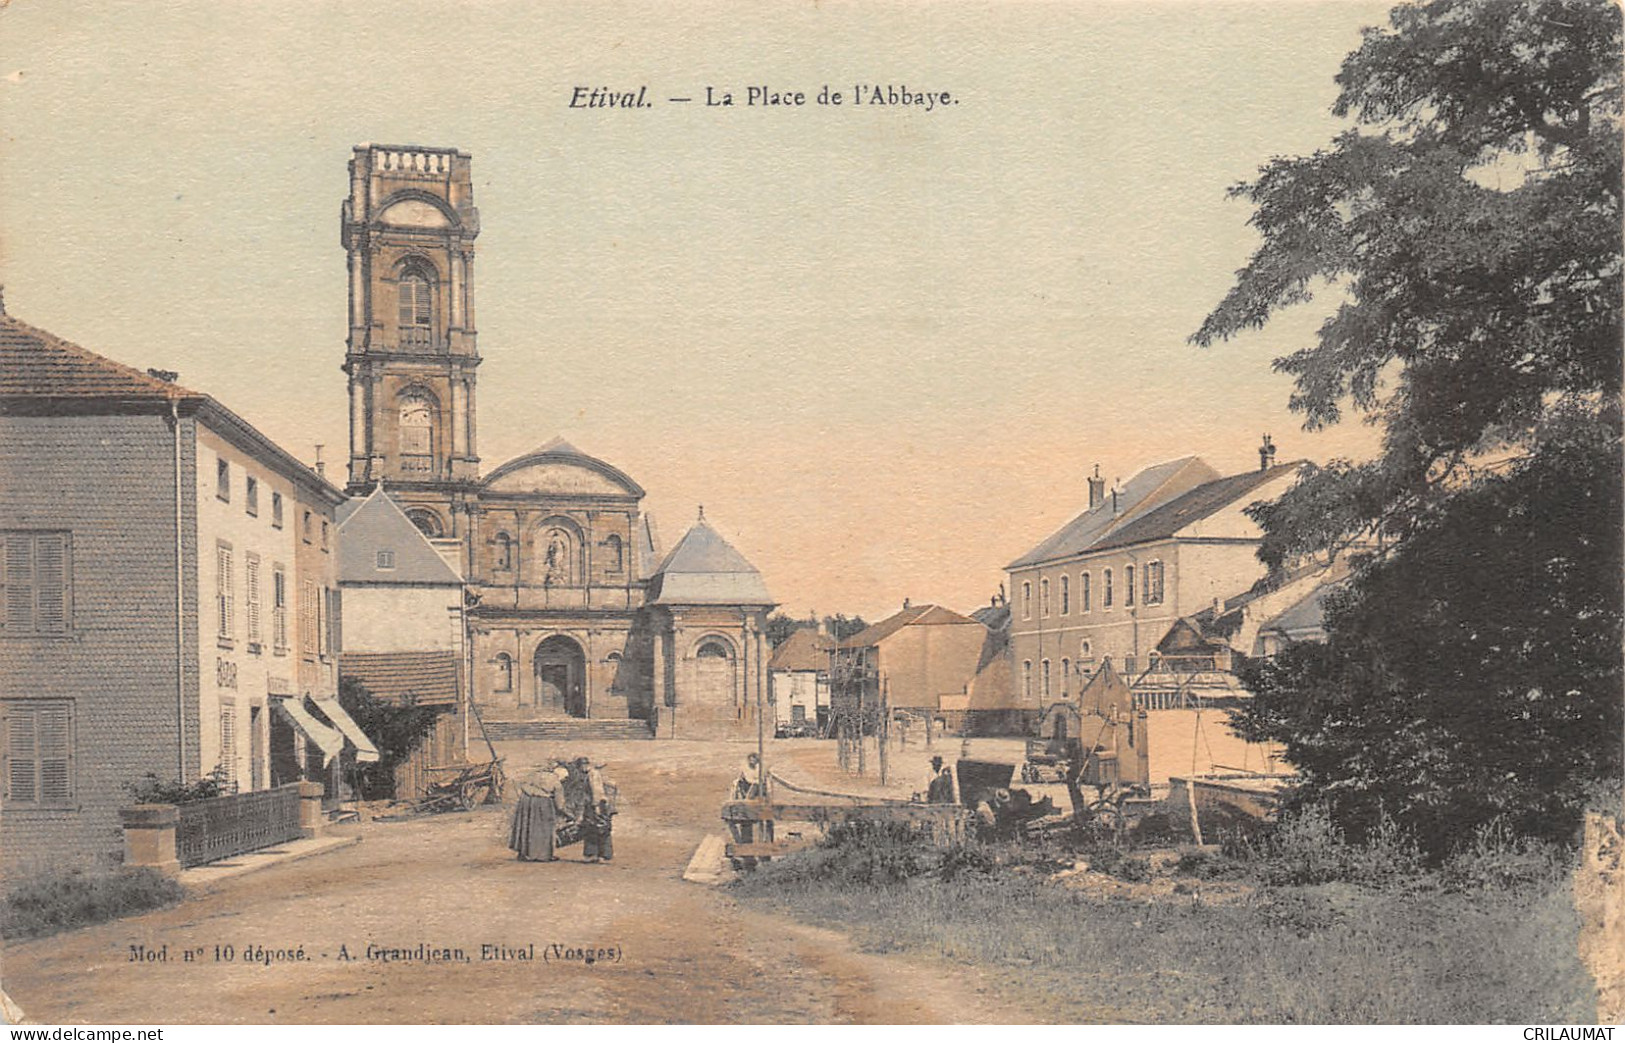 88-ETIVAL-PLACE DE L ABBAYE-N 6010-H/0149 - Etival Clairefontaine